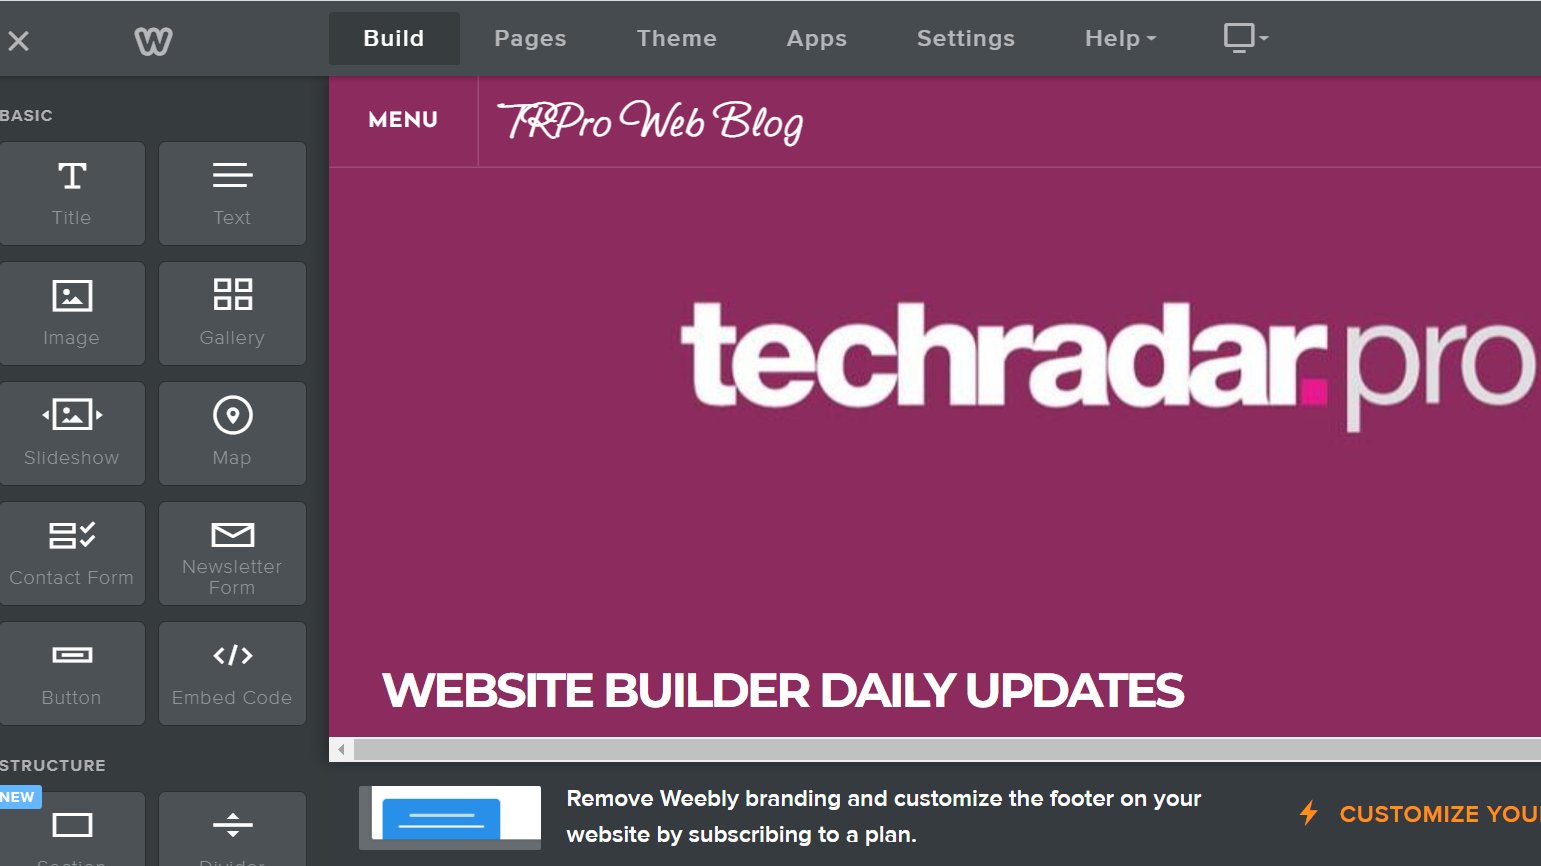 A screenshot of a TechRadar Pro blog created with the Weebly website builder